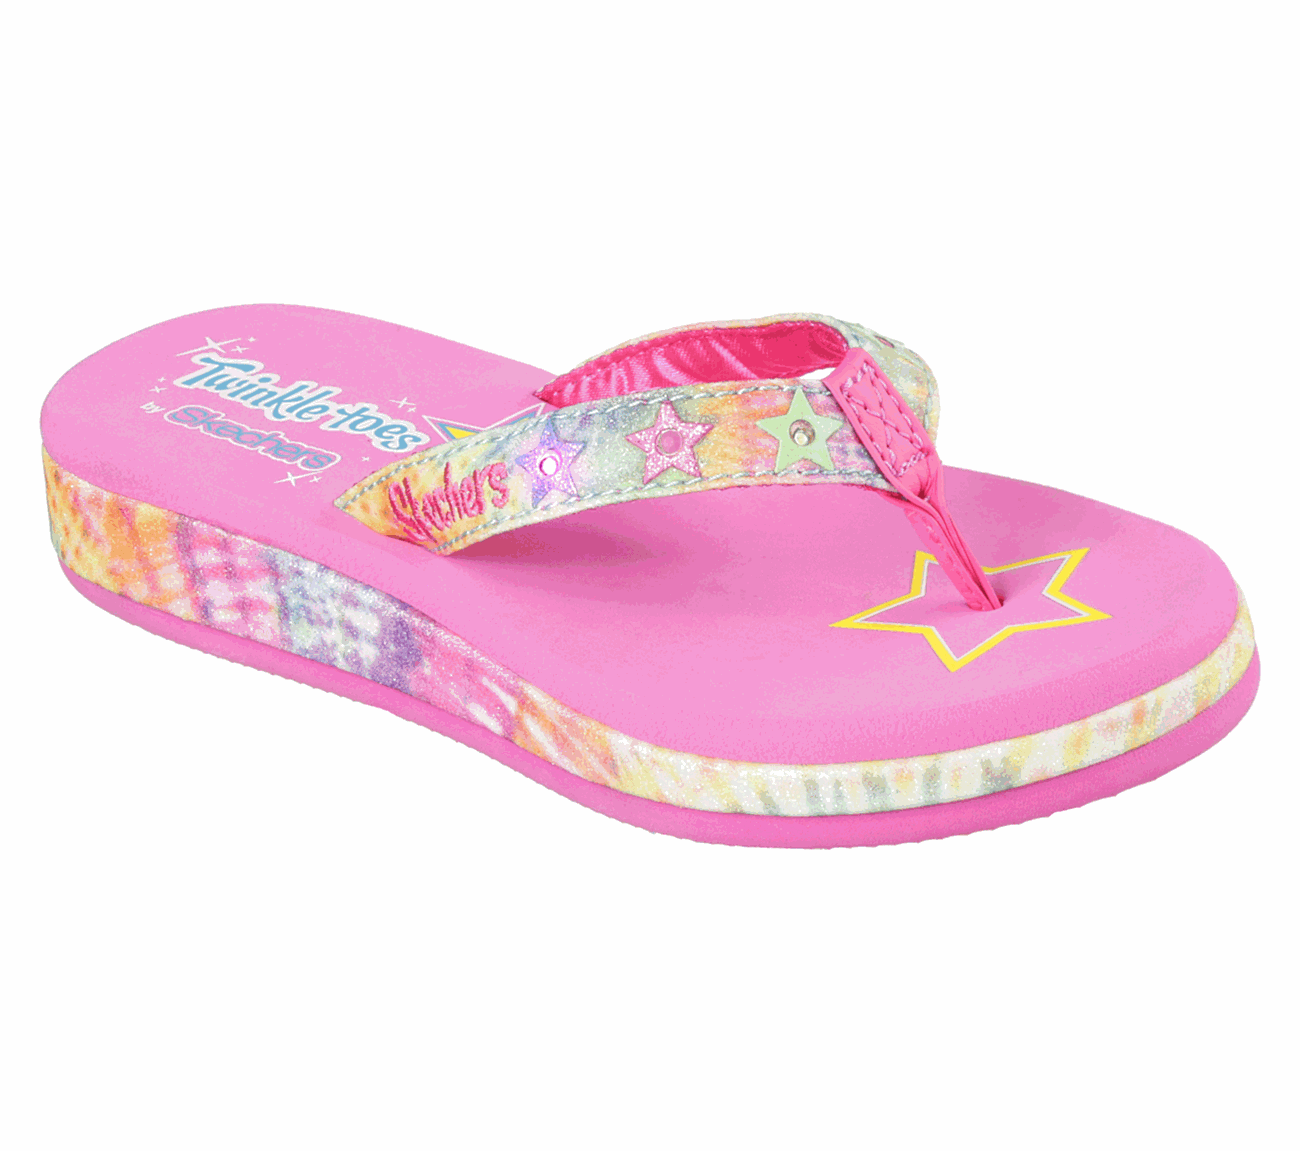 twinkle toes sandals